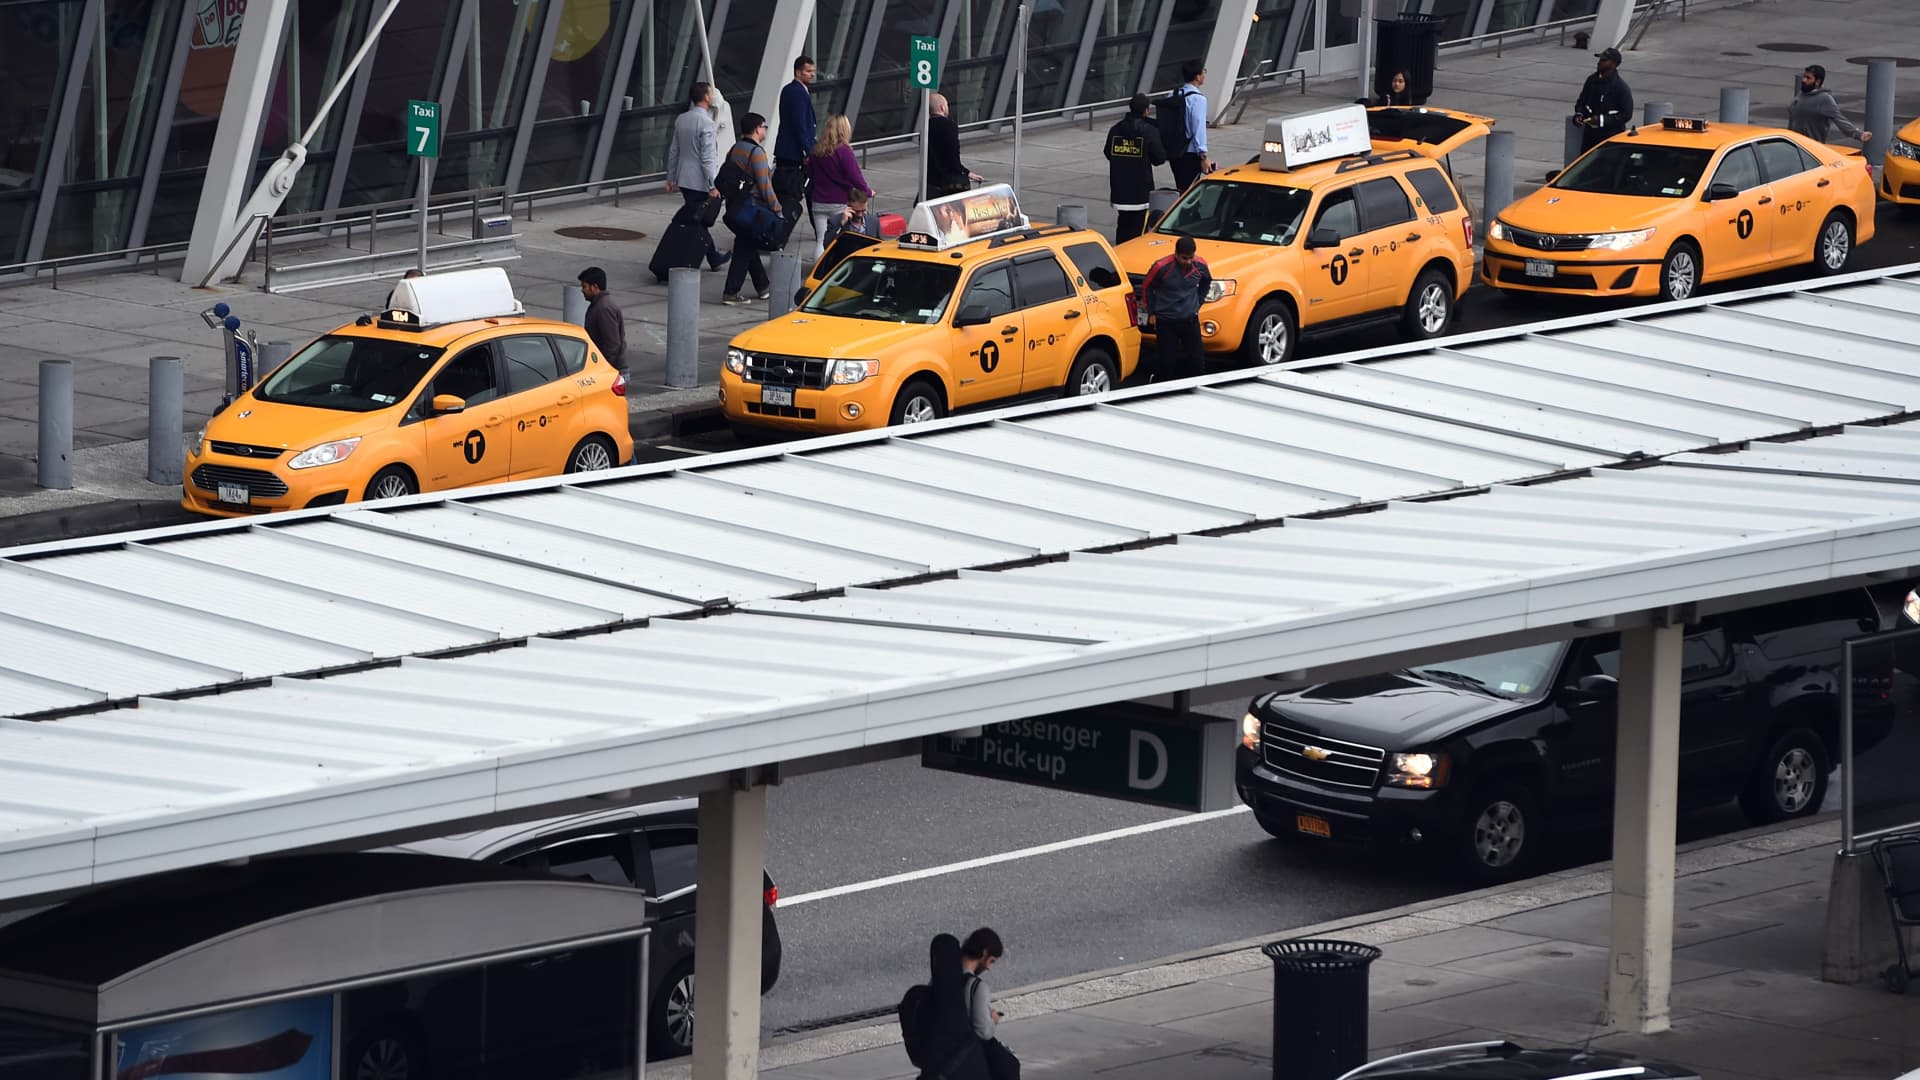 Two New York men arrested for conspiring with Russians to hack JFK taxi system